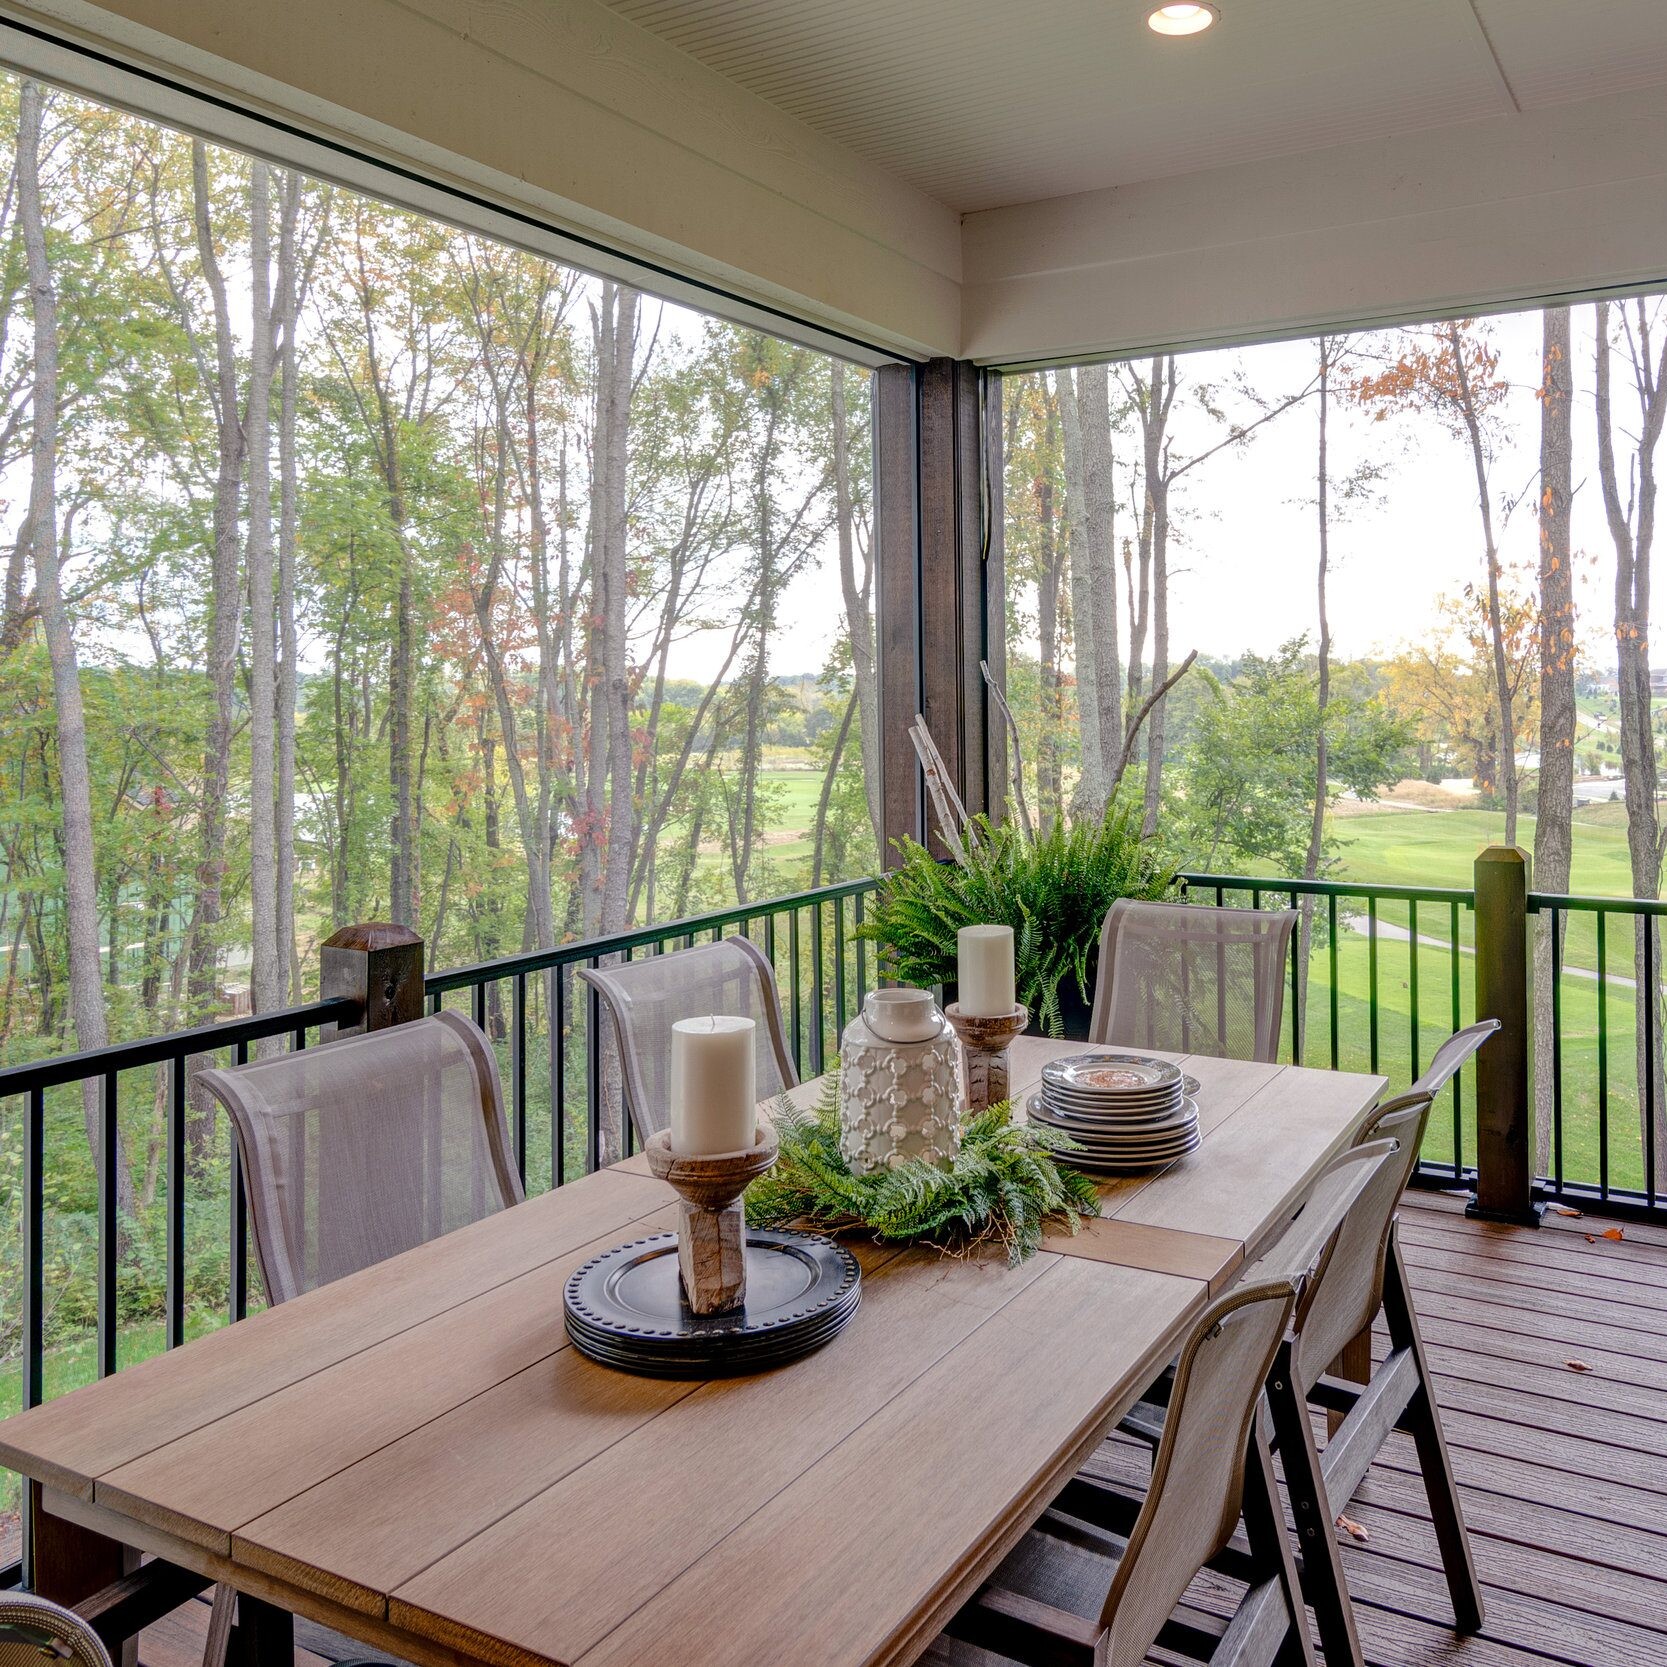 A deck with a table and chairs overlooking a wooded area, perfect for enjoying the natural surroundings of your new home in Carmel, Indiana.